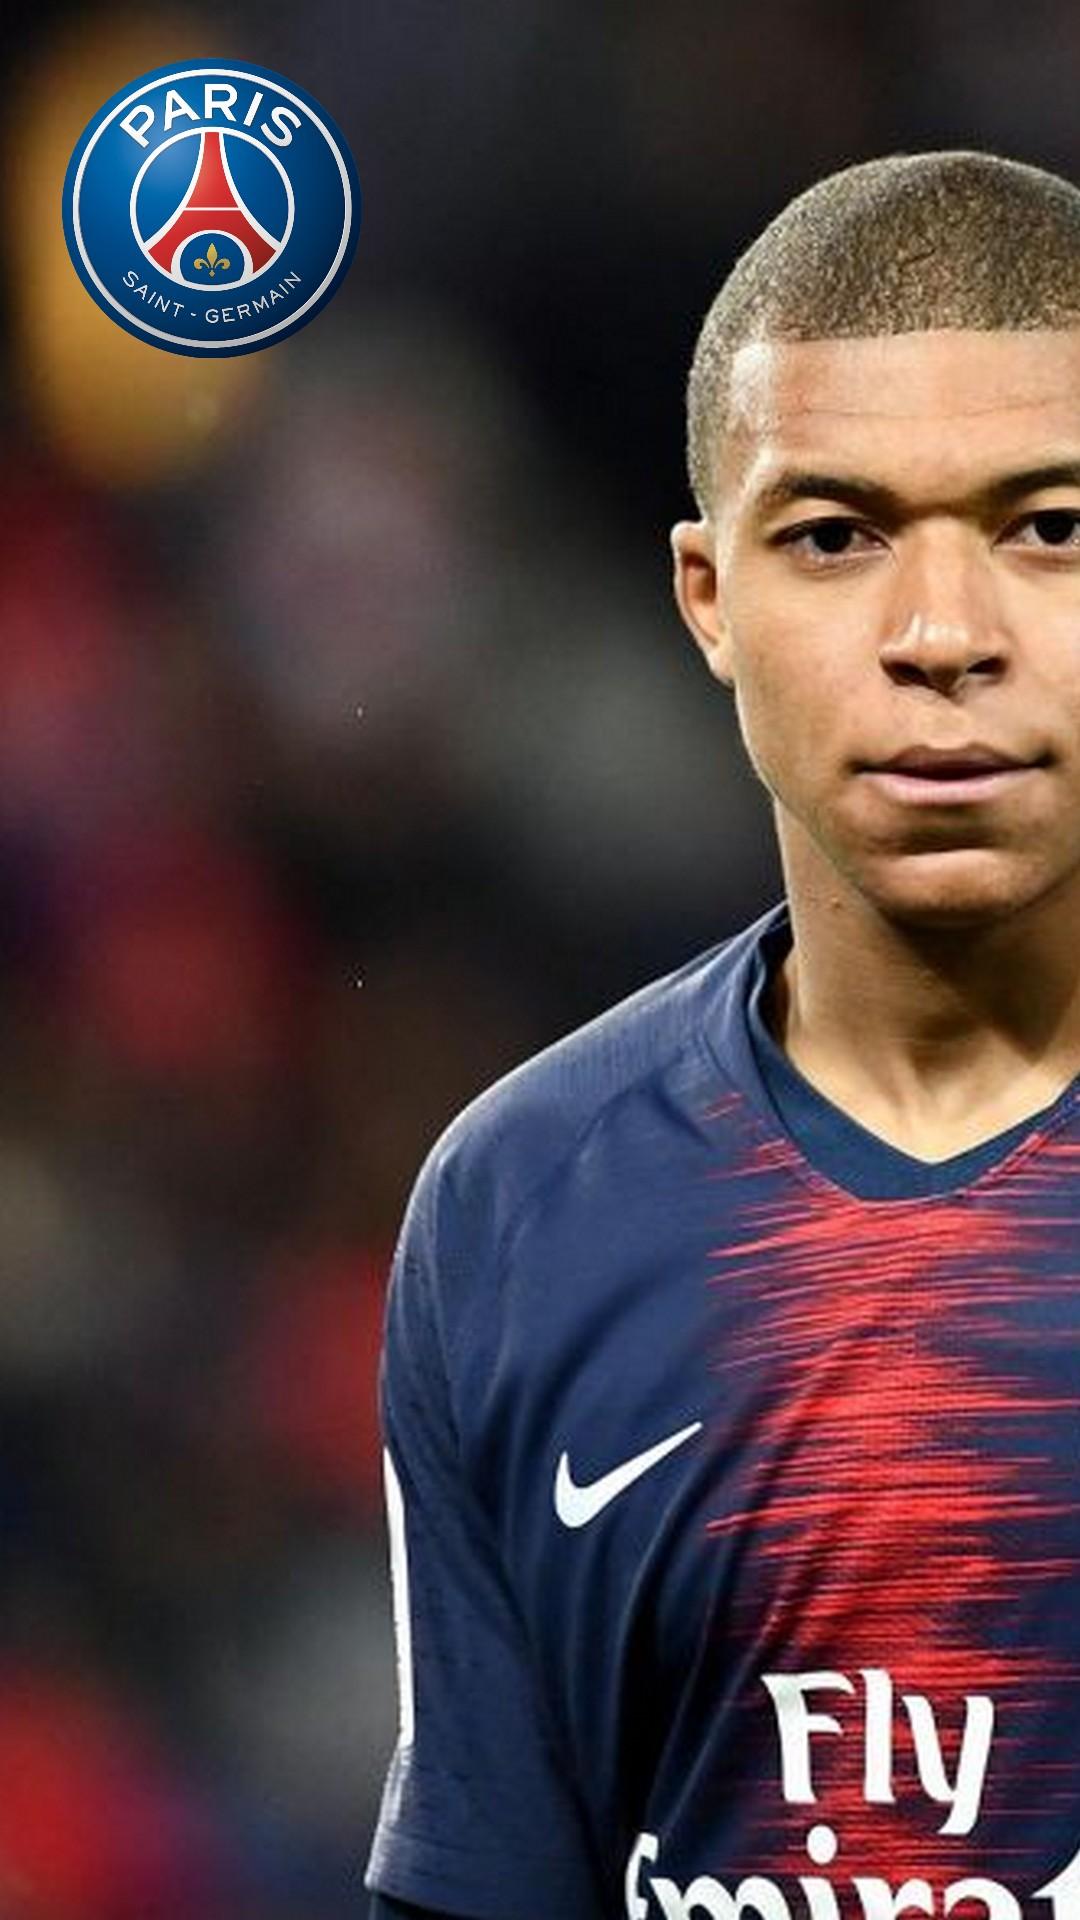 Free download Kylian Mbappe PSG iPhone Wallpaper 2019 Football